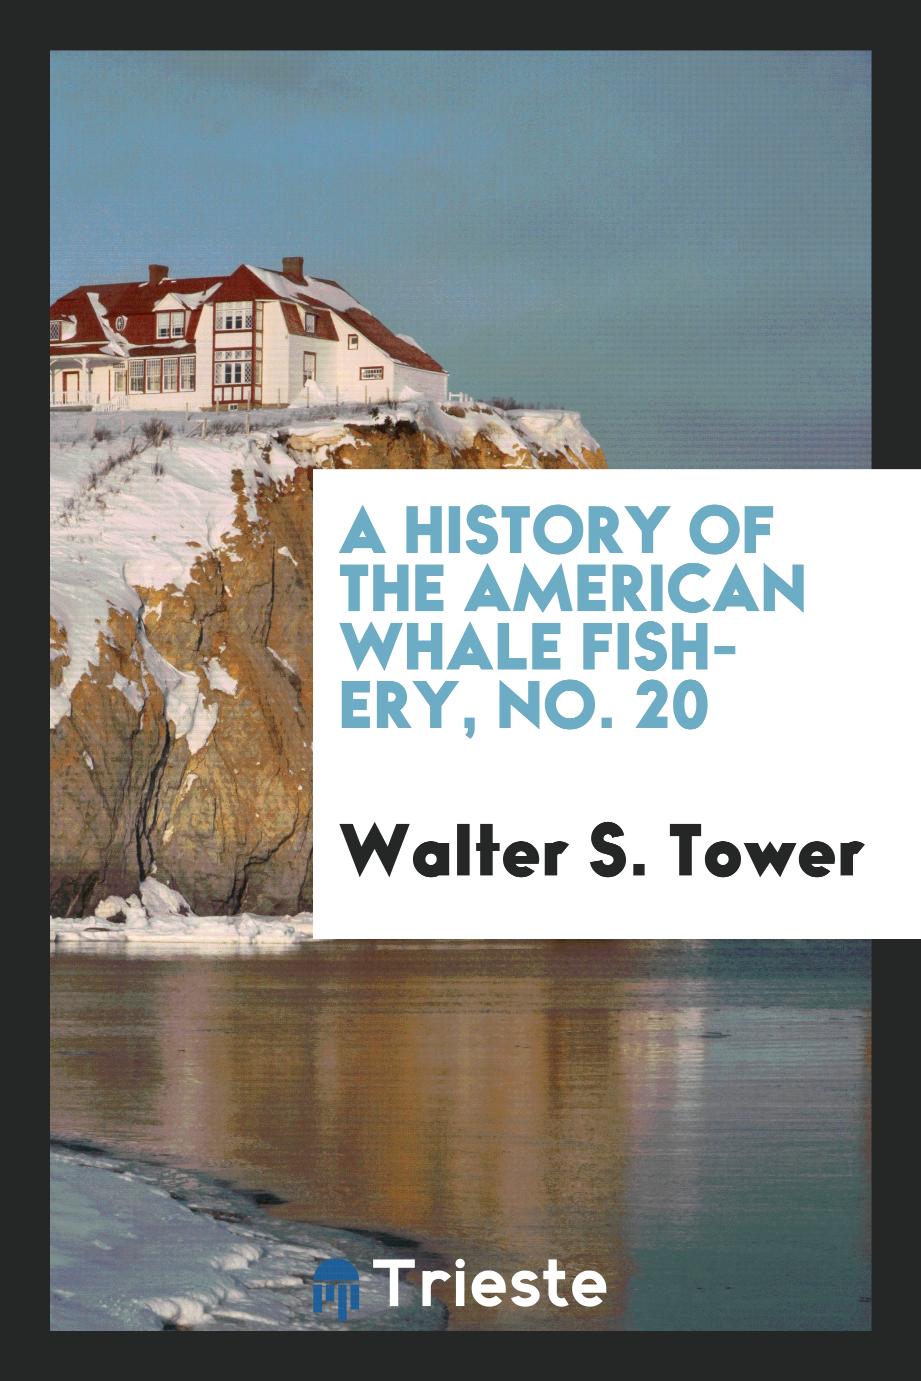 A history of the American whale fishery, No. 20